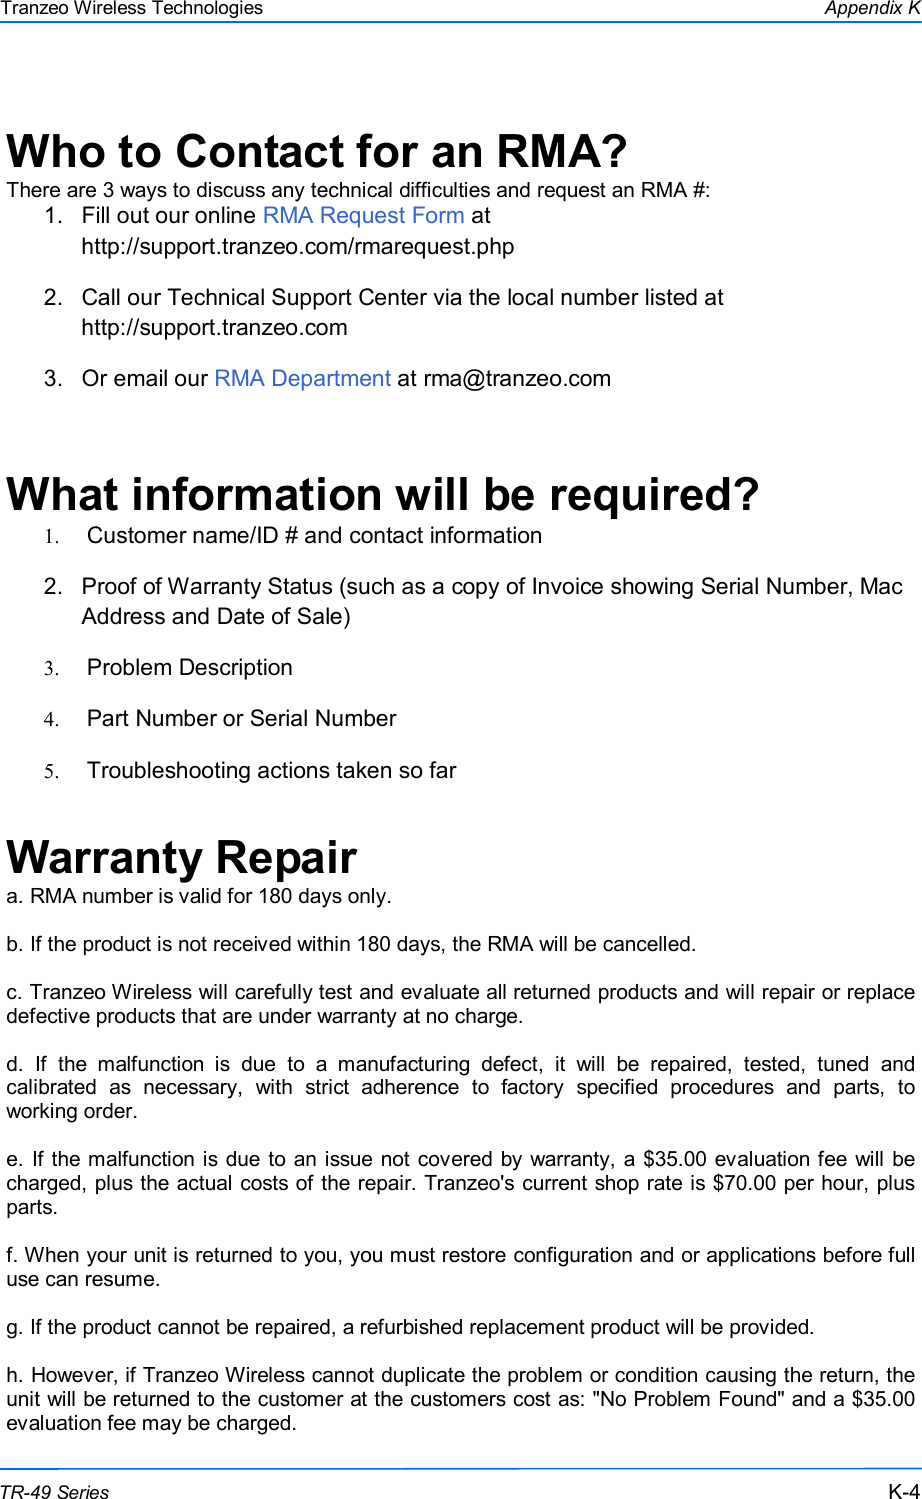  444 This document is intended for Public Distribution                         19473 Fraser Way, Pitt Meadows, B.C. Canada V3Y  2V4 Appendix K K-4 TR-49 Series Tranzeo Wireless Technologies  Who to Contact for an RMA? There are 3 ways to discuss any technical difficulties and request an RMA #: 1.  Fill out our online RMA Request Form at                                                                     http://support.tranzeo.com/rmarequest.php  2.  Call our Technical Support Center via the local number listed at                              http://support.tranzeo.com  3.  Or email our RMA Department at rma@tranzeo.com   What information will be required? 1.   Customer name/ID # and contact information 2.  Proof of Warranty Status (such as a copy of Invoice showing Serial Number, Mac Address and Date of Sale) 3.   Problem Description 4.   Part Number or Serial Number 5.   Troubleshooting actions taken so far  Warranty Repair a. RMA number is valid for 180 days only.  b. If the product is not received within 180 days, the RMA will be cancelled.  c. Tranzeo Wireless will carefully test and evaluate all returned products and will repair or replace defective products that are under warranty at no charge.  d.  If  the  malfunction  is  due  to  a  manufacturing  defect,  it  will  be  repaired,  tested,  tuned  and calibrated  as  necessary,  with  strict  adherence  to  factory  specified  procedures  and  parts,  to working order.  e. If the malfunction is due to an issue not covered by warranty, a $35.00 evaluation fee will be charged, plus the actual costs of the repair. Tranzeo&apos;s current shop rate is $70.00 per hour, plus parts.  f. When your unit is returned to you, you must restore configuration and or applications before full use can resume.  g. If the product cannot be repaired, a refurbished replacement product will be provided.  h. However, if Tranzeo Wireless cannot duplicate the problem or condition causing the return, the unit will be returned to the customer at the customers cost as: &quot;No Problem Found&quot; and a $35.00 evaluation fee may be charged. 